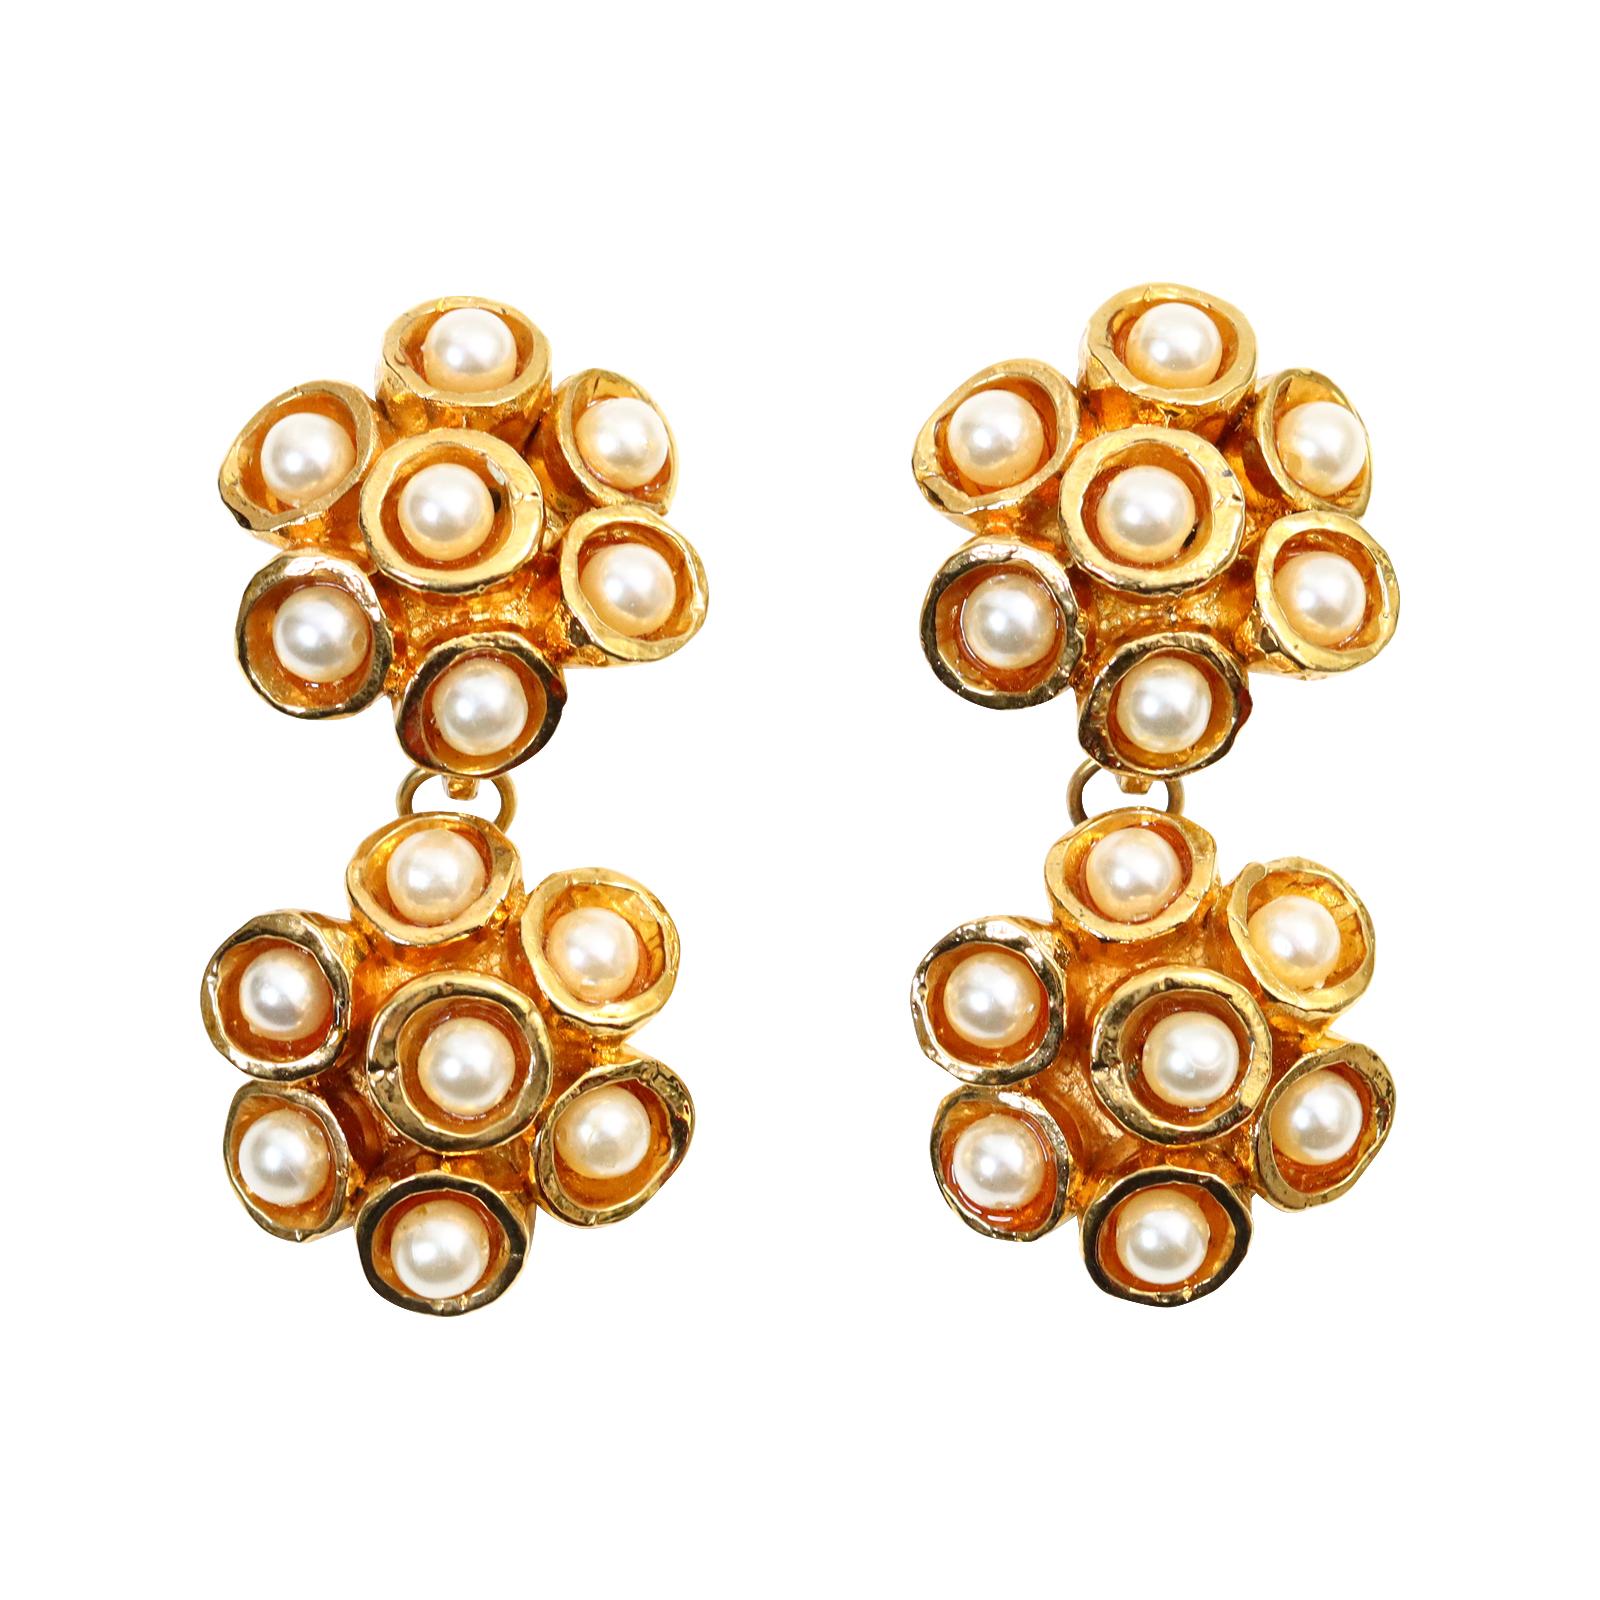 Vintage Alexis Lahellec Gold Honeycomb Faux Pearl Dangling Earrings Circa 1980s. Each little piece of the honeycomb is at a different level and has faux pearl which looks so great in the gold. Clip On.  These have such a look and are very classic